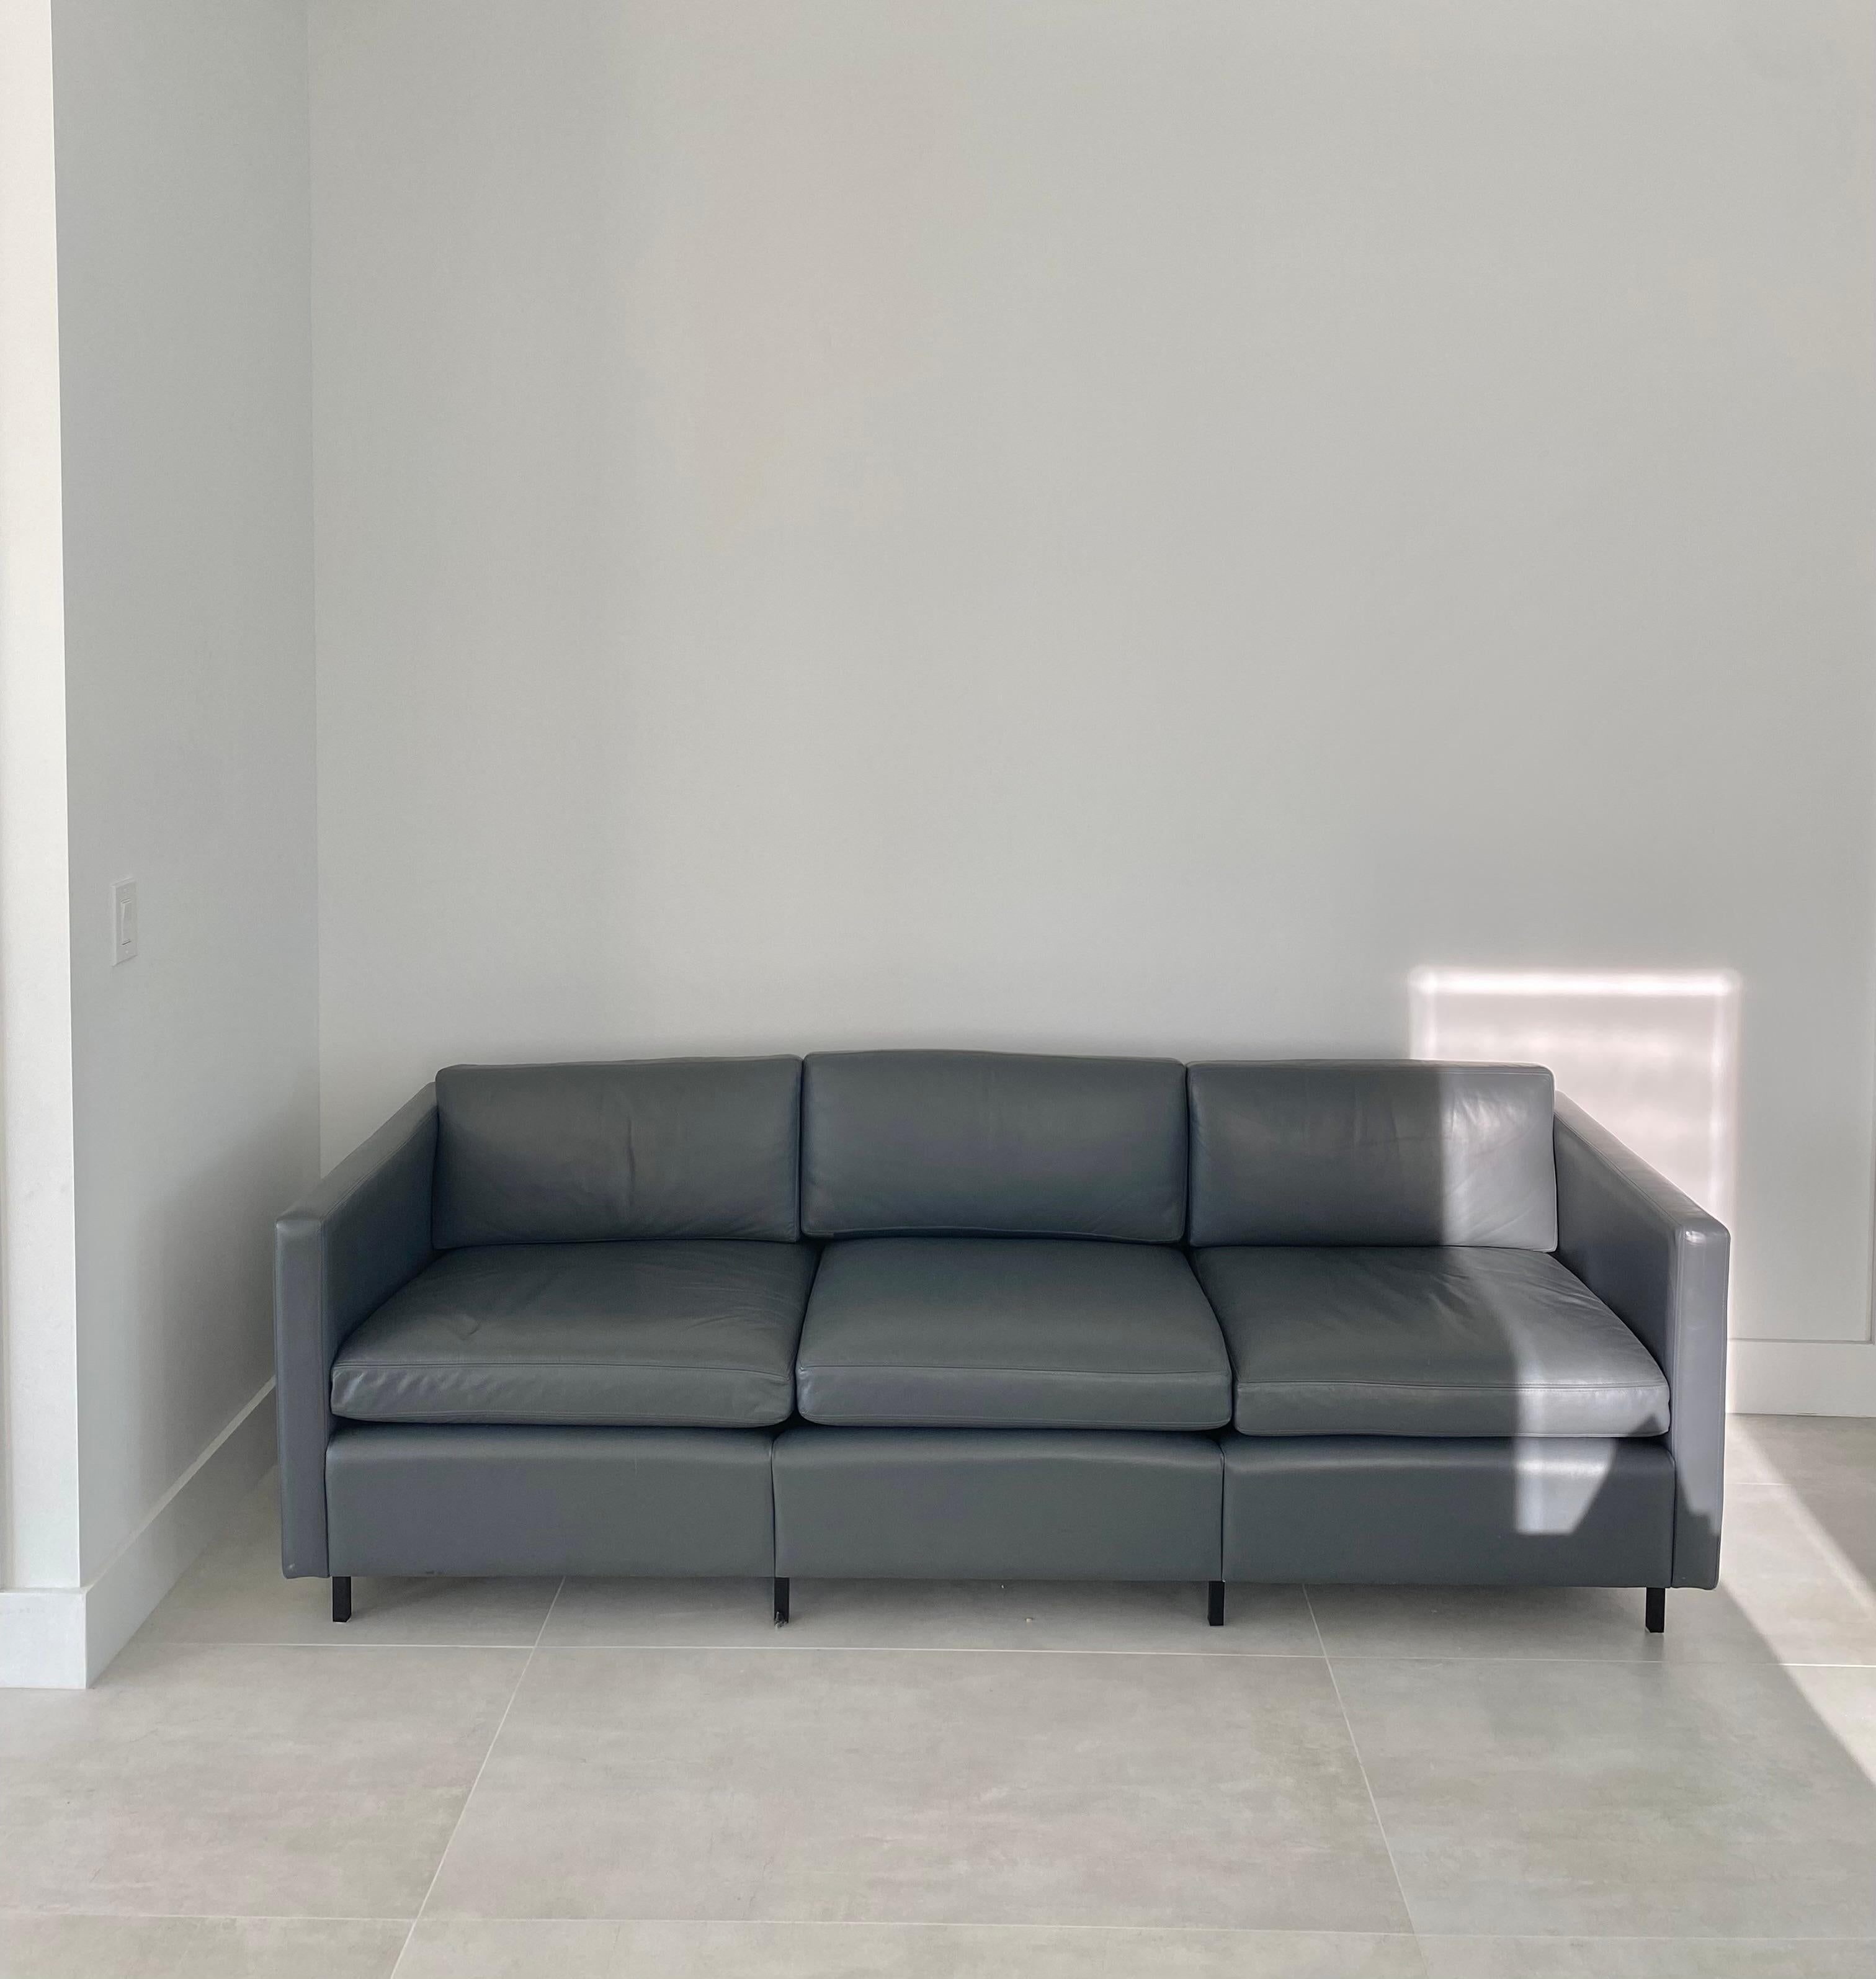 Minimalist Modernist Knoll Charles Pfister in Gray Leather Sofa For Sale 2